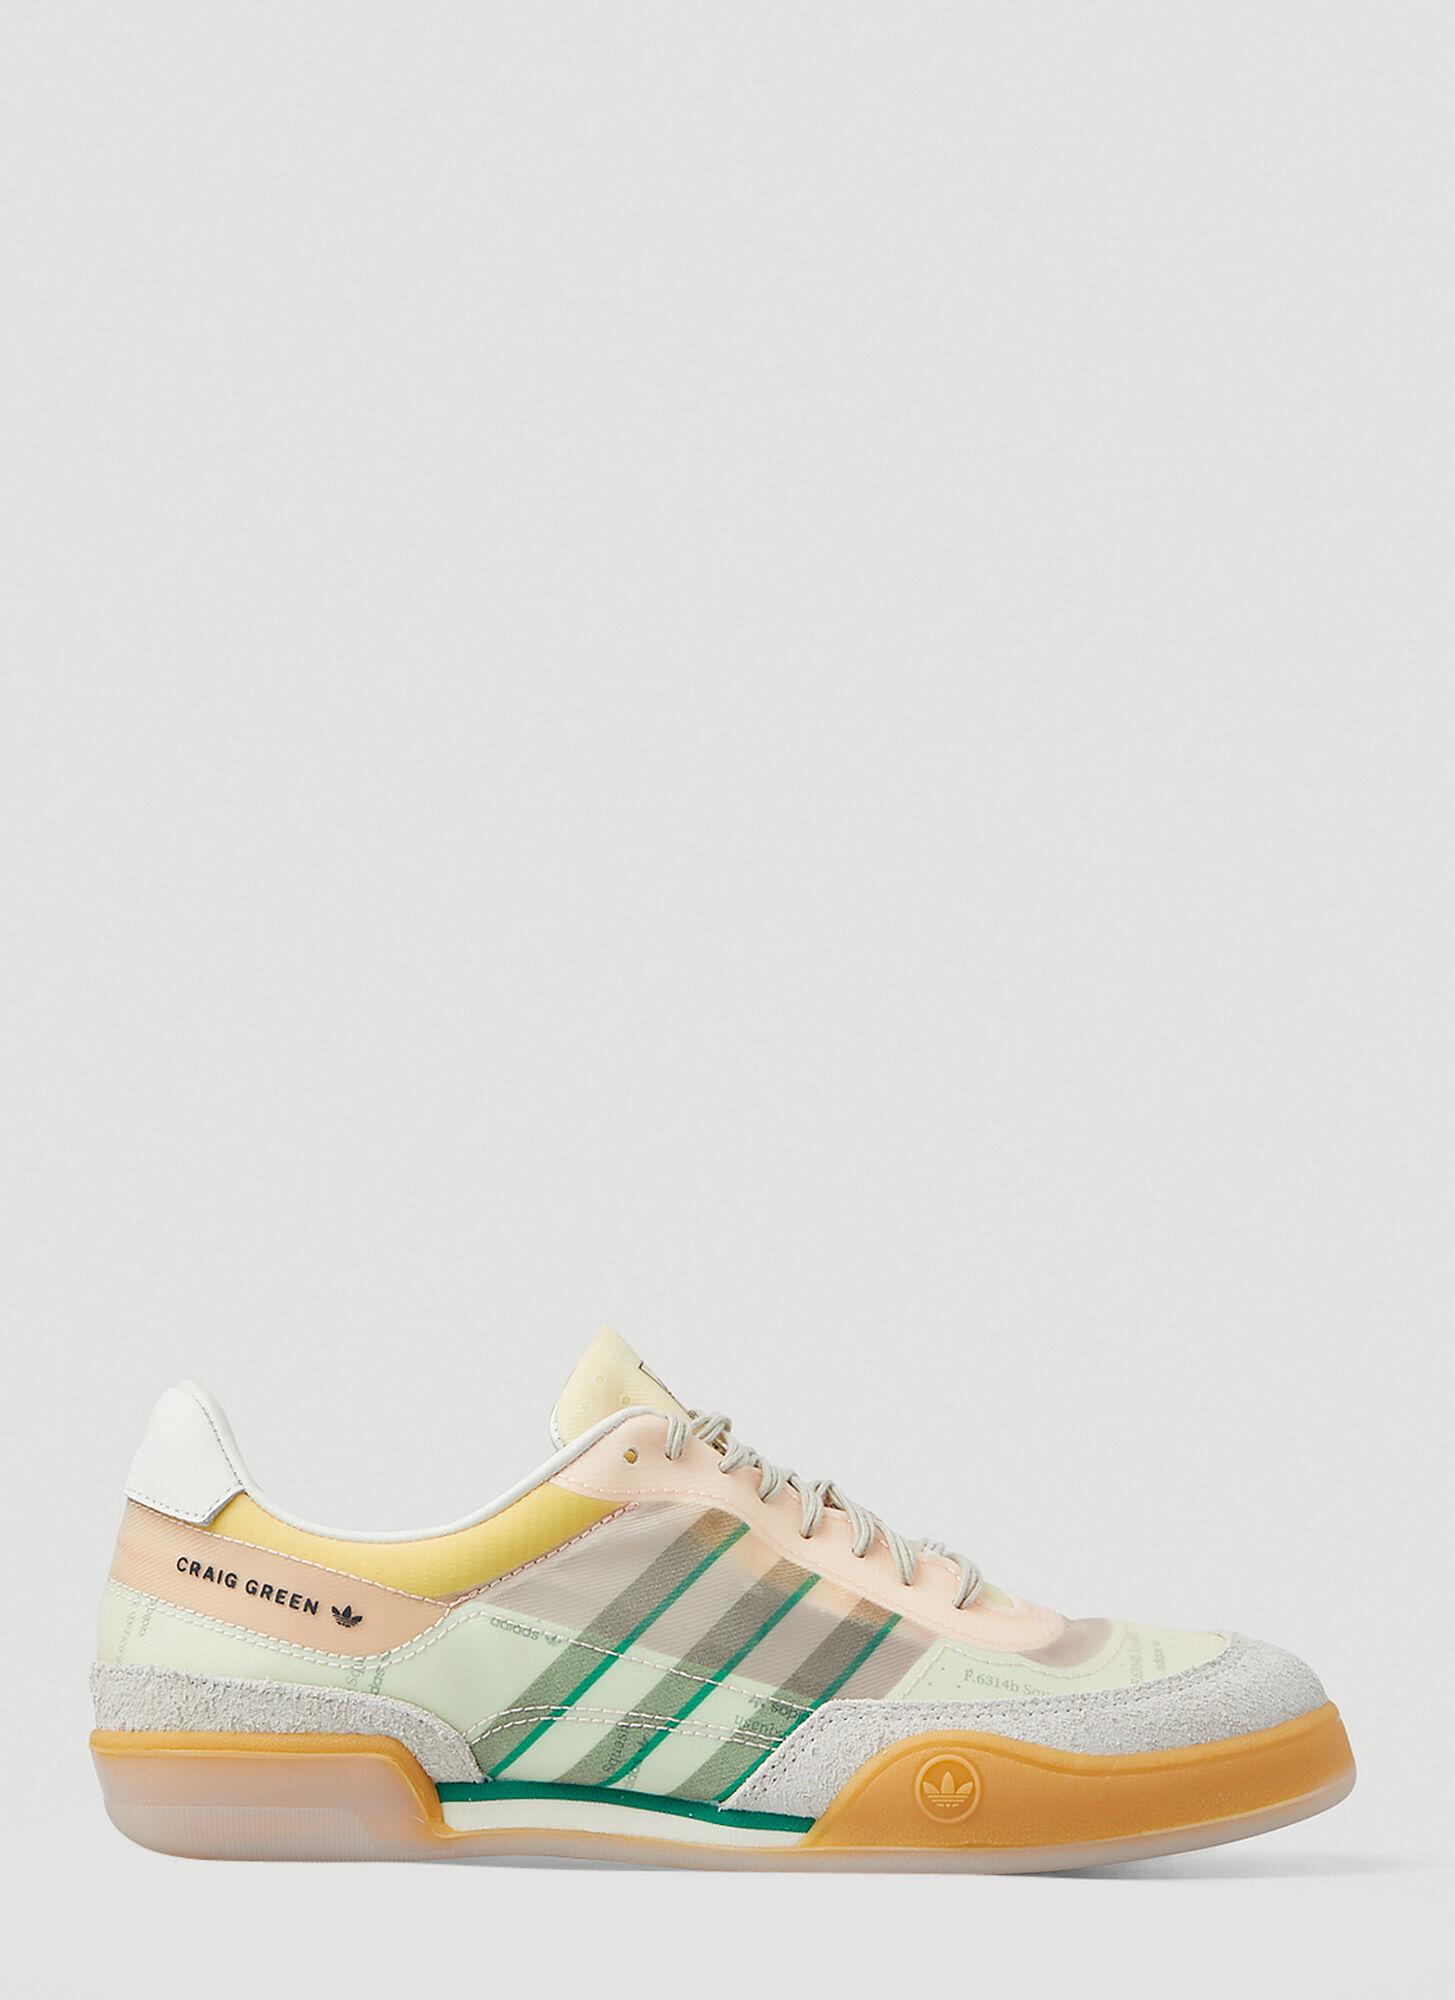 ADIDAS BY CRAIG GREEN Squash Polta Sneakers in Natural for Men | Lyst